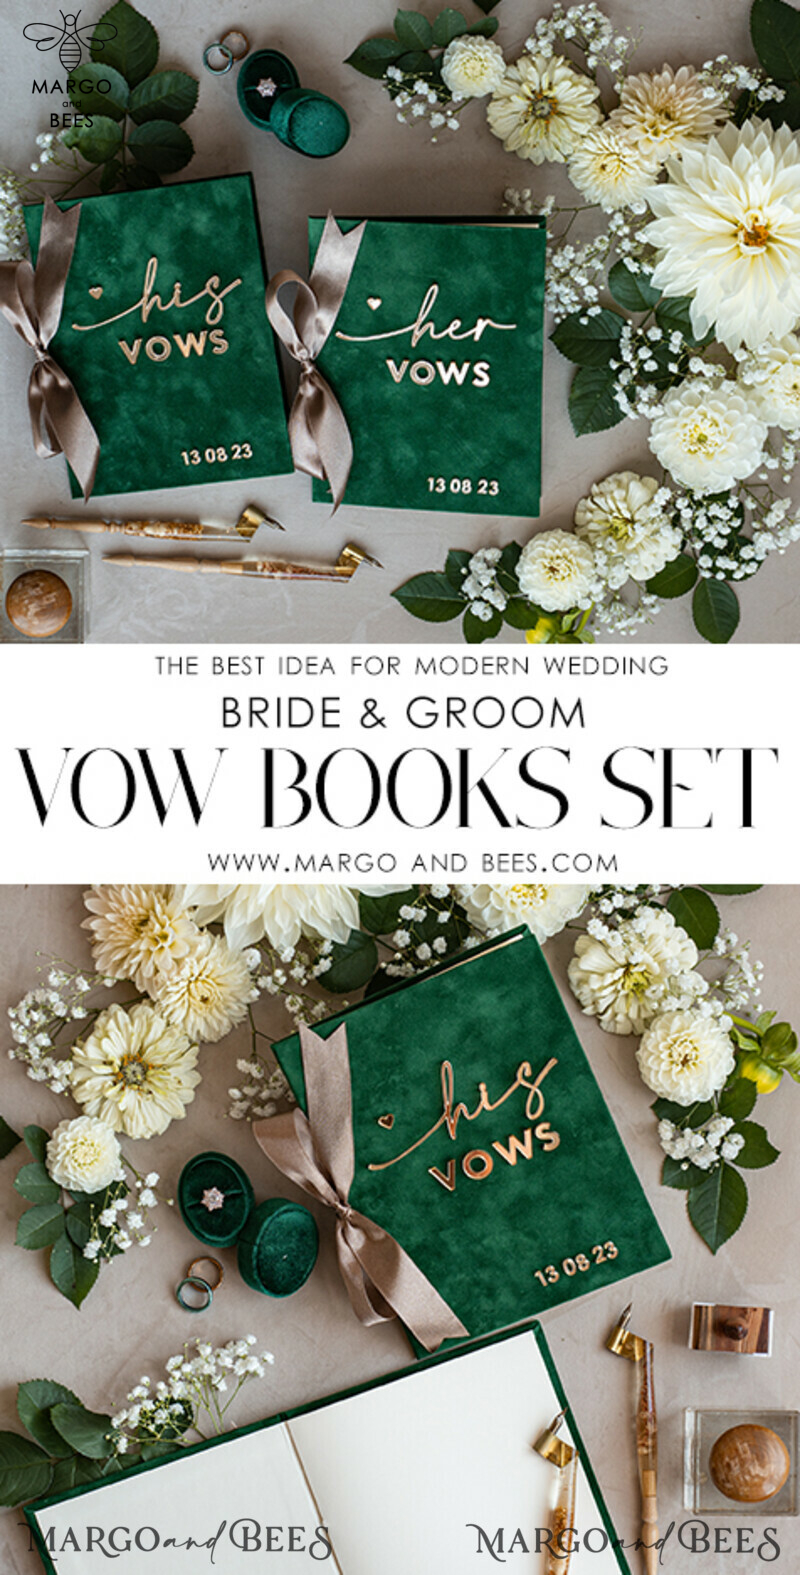 Personalized Velvet Emerald Green Garden Vow Books Set for the Bride and Groom in a Greenery Wedding-7